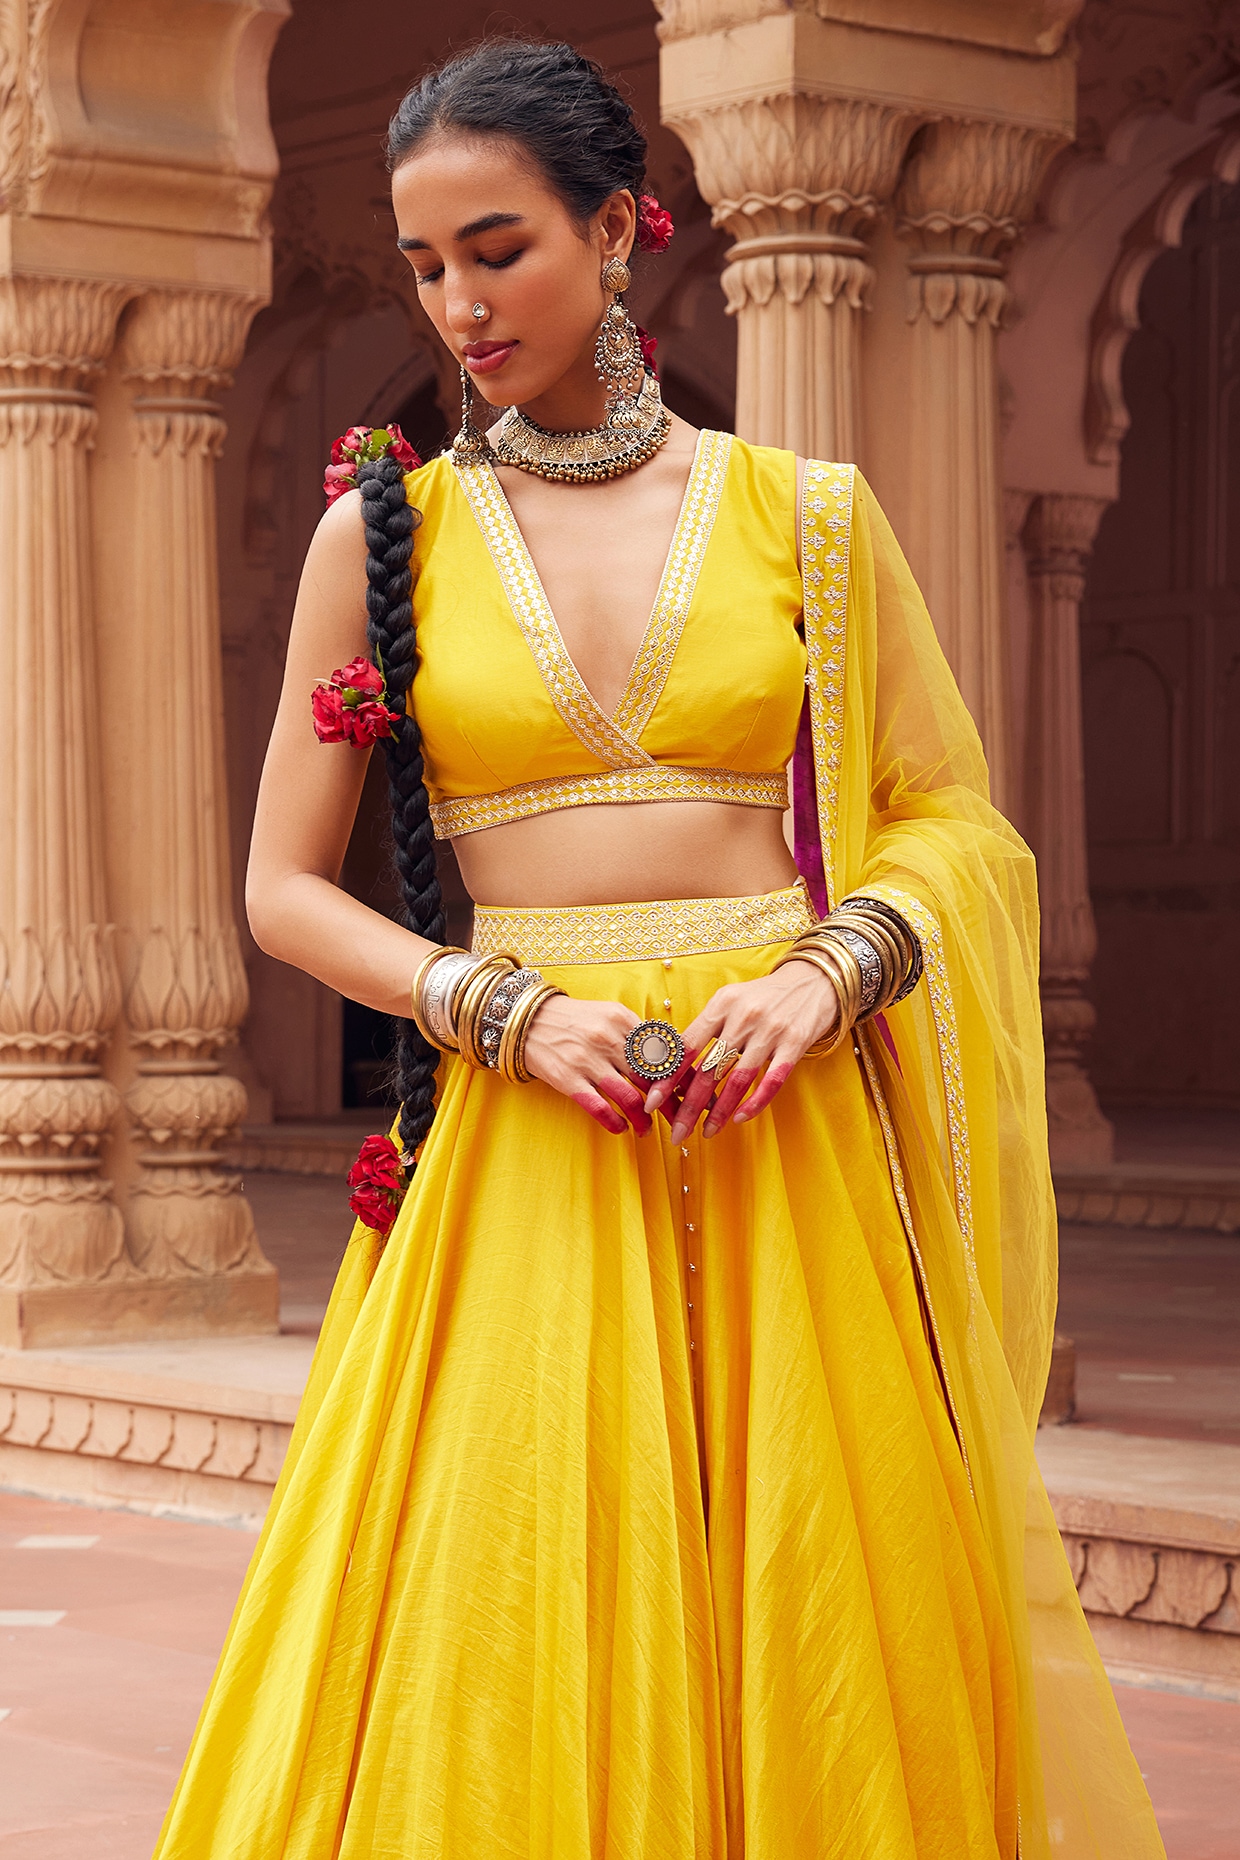 Nidhhi Agerwal Is A Ray Of Winter Sunshine In Her Glorious Yellow Lehenga